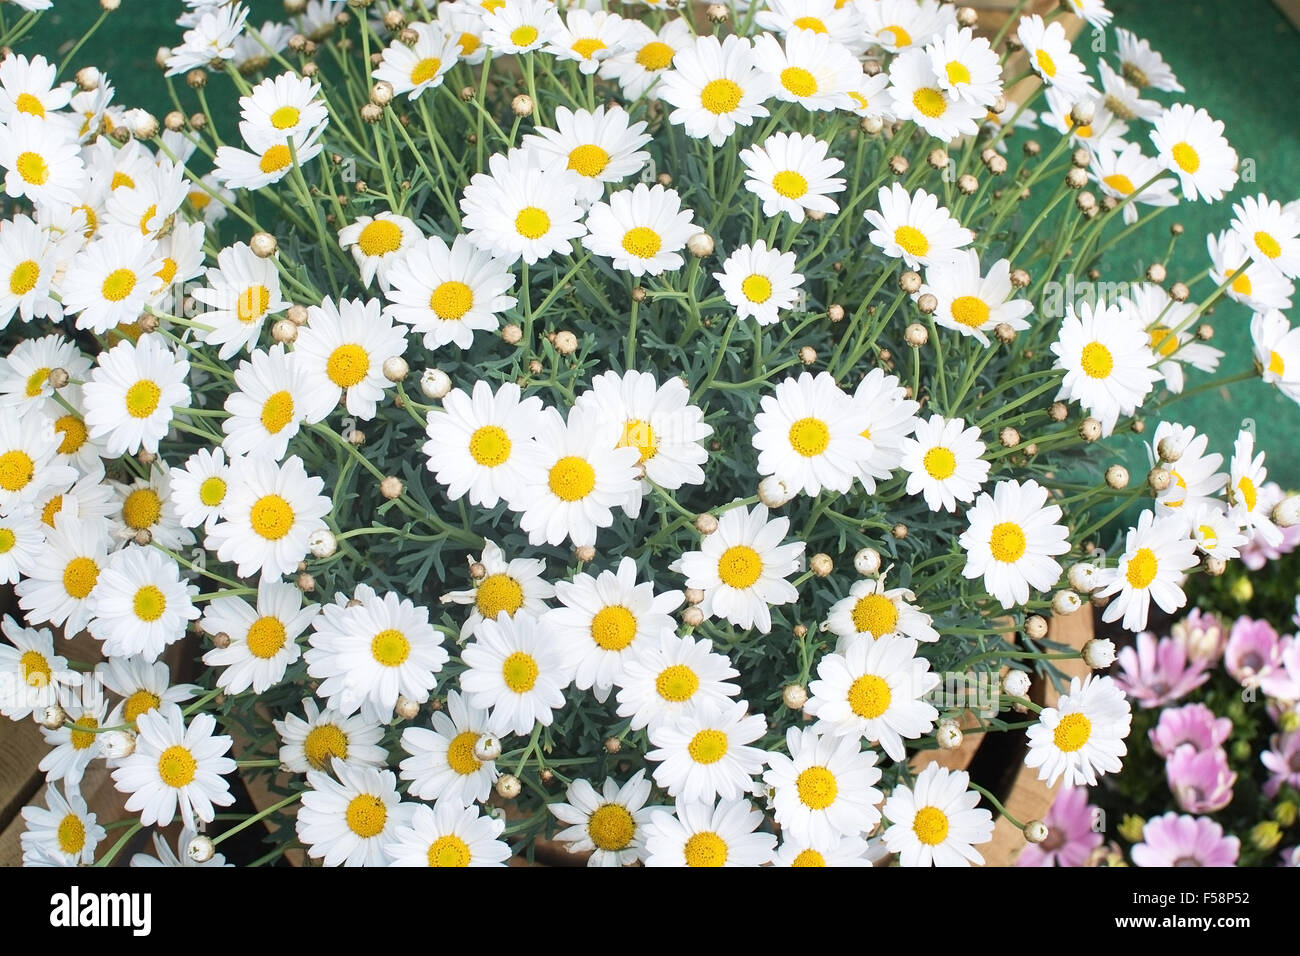 White Oxe-eye daisy or Moon Daisy May flowers, Leucanthemum vulgare, blossoming in May. Stock Photo